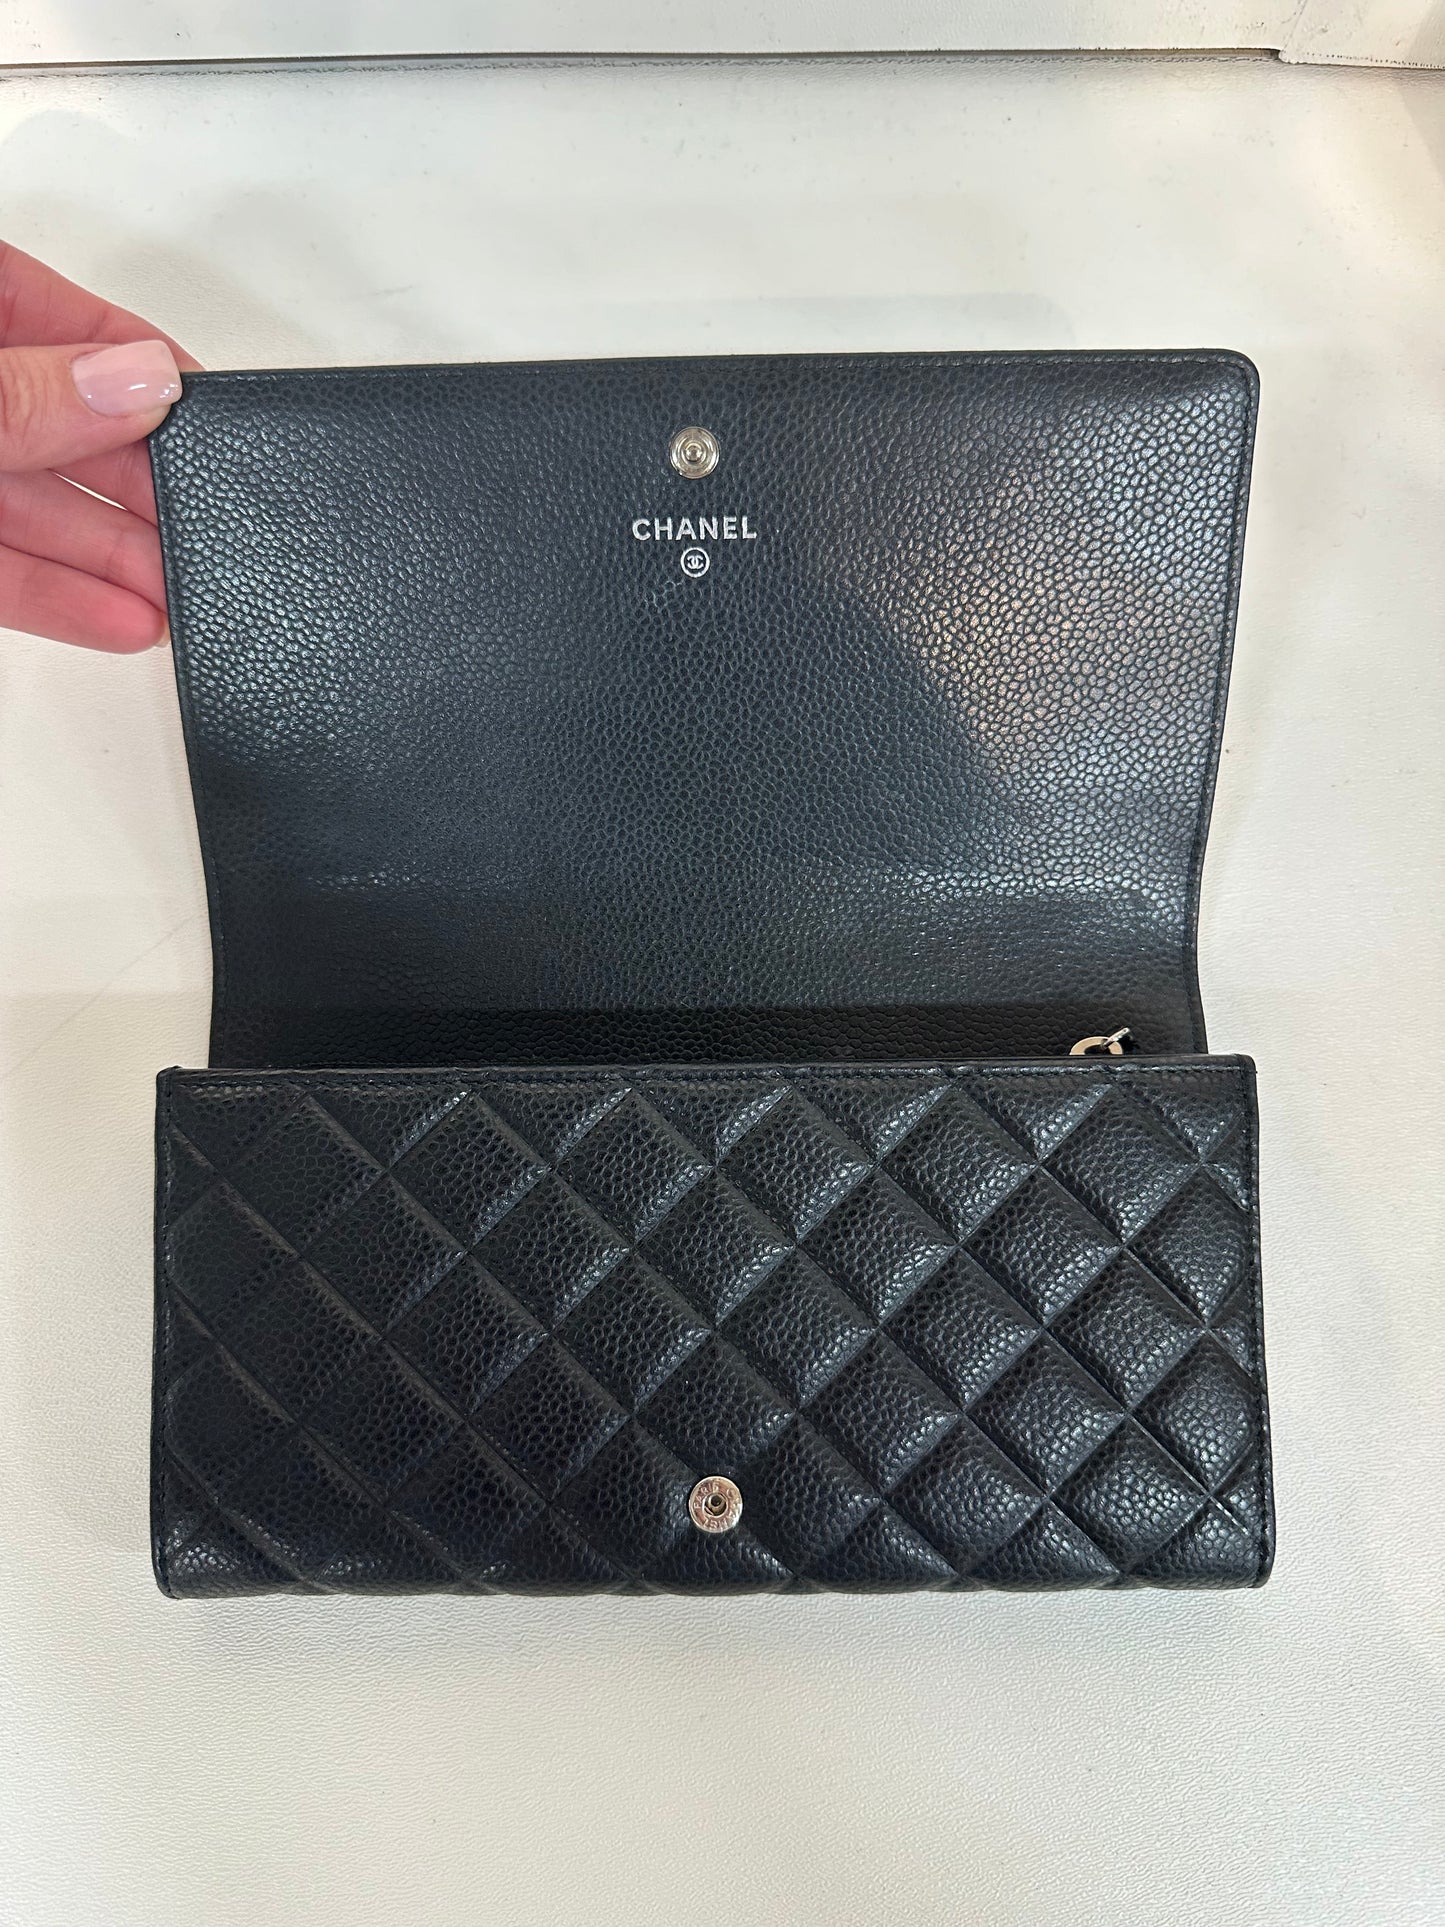 Chanel continental wallet